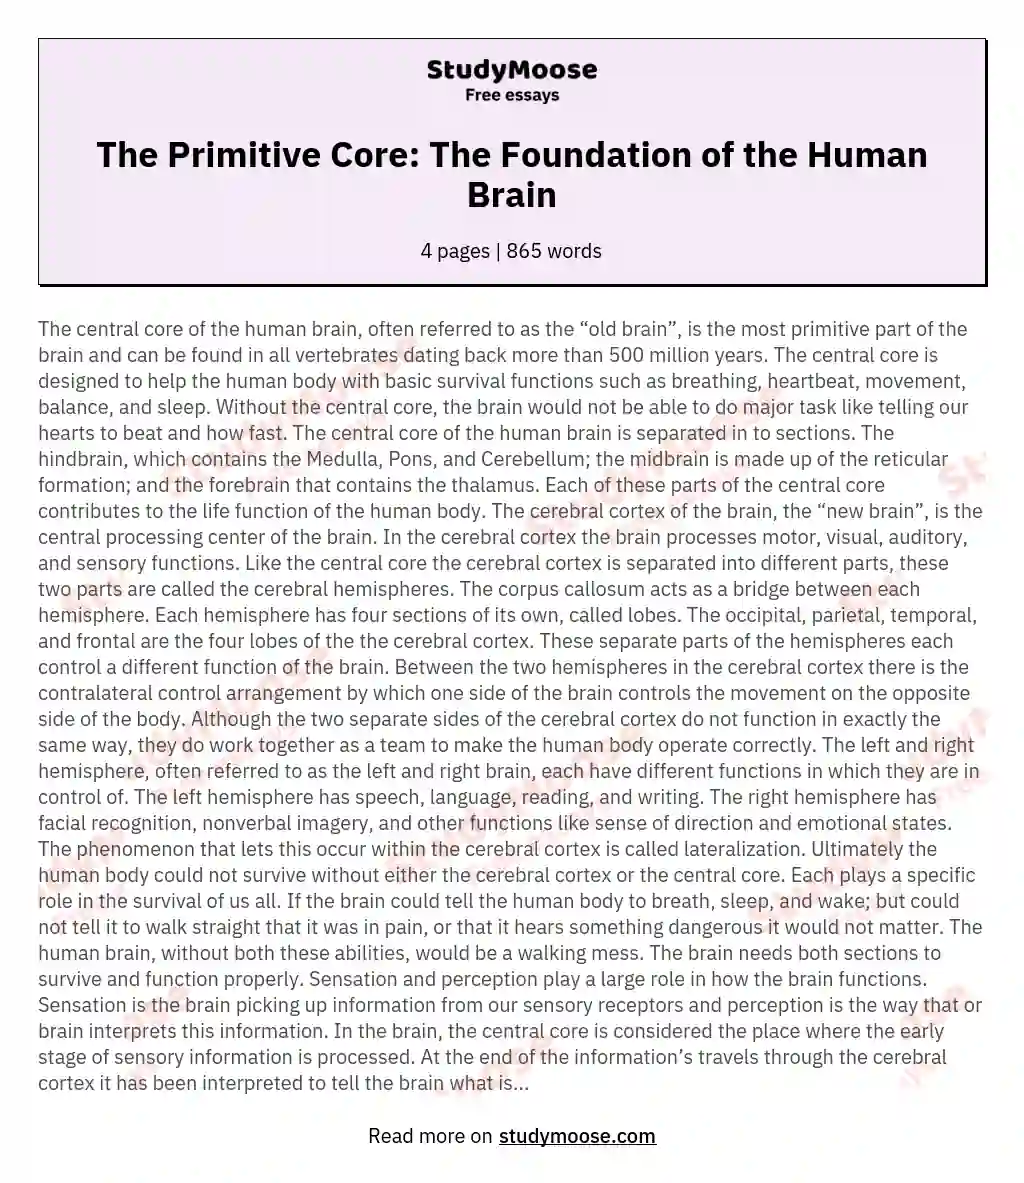 The Primitive Core: The Foundation of the Human Brain essay